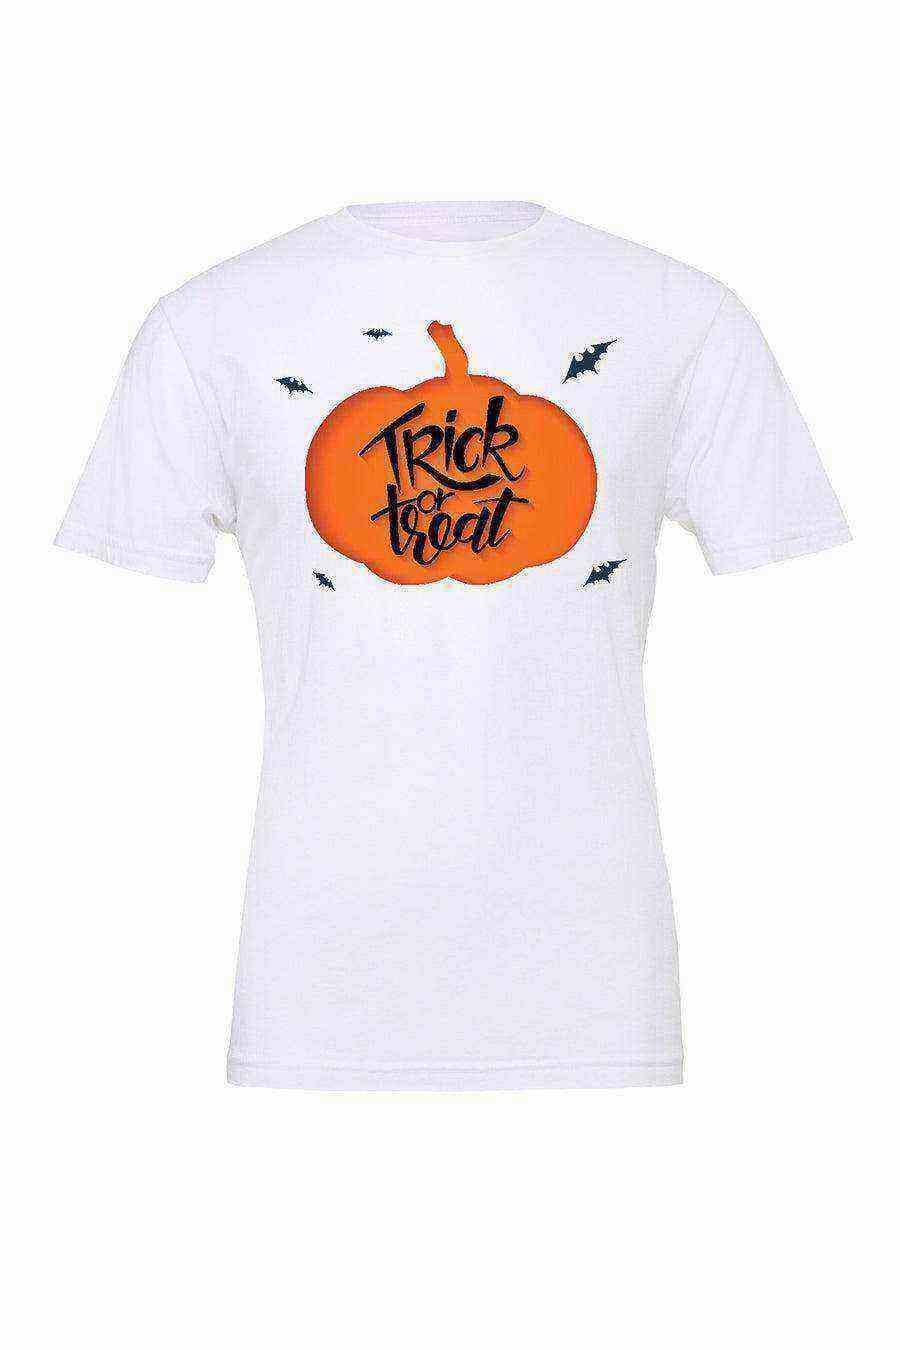 Womens | Trick or Treat Shirt - Dylan's Tees